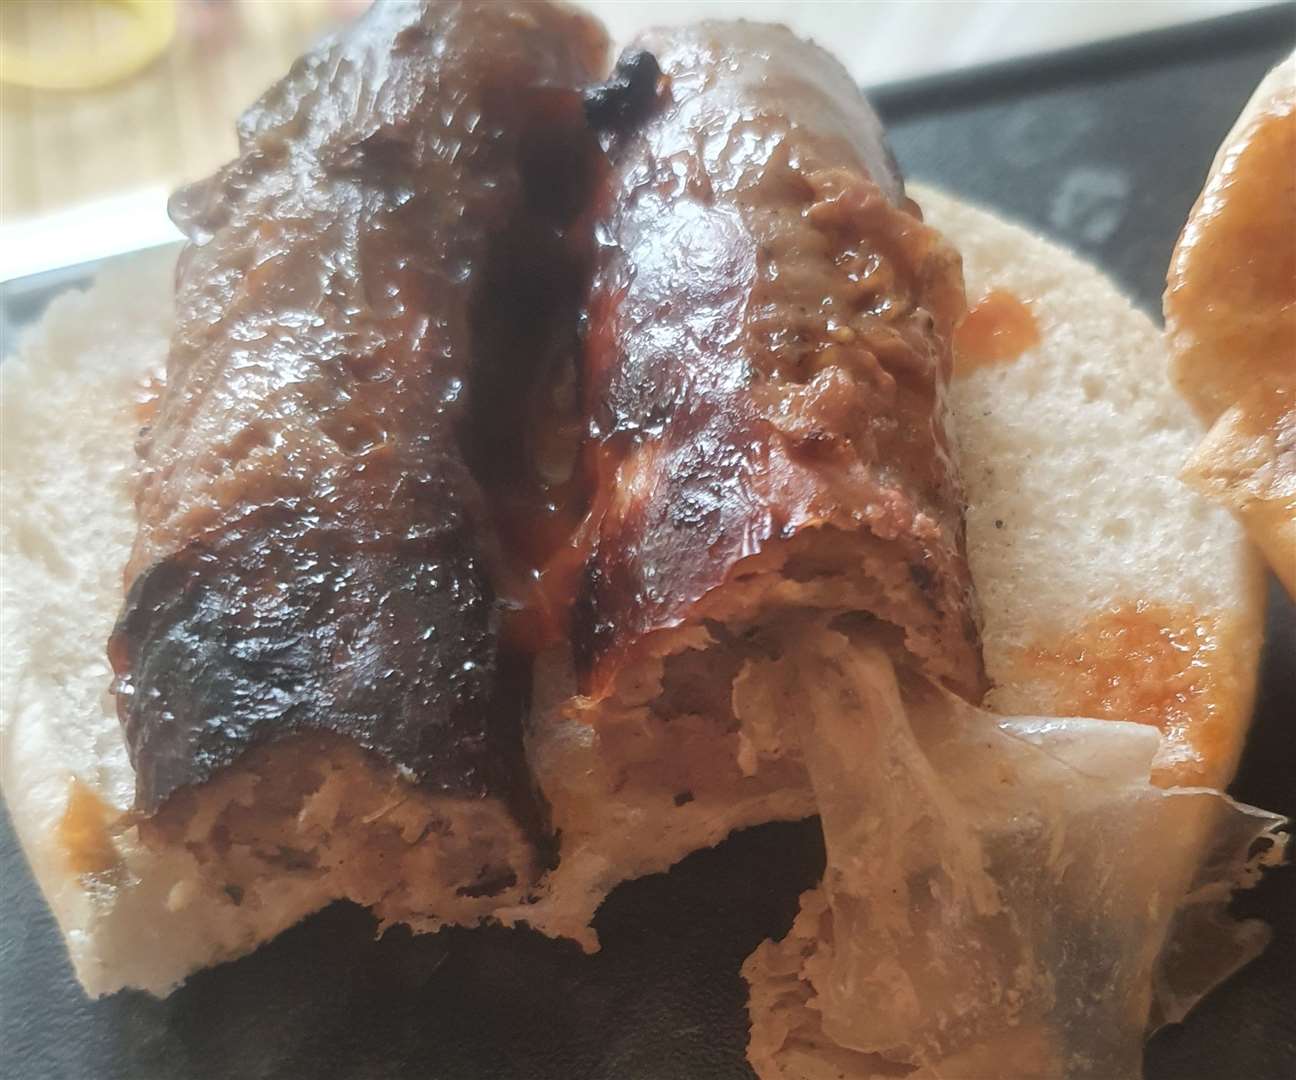 The sausage which Miss Hunt bit into during a family barbecue, to find a nasty surprise